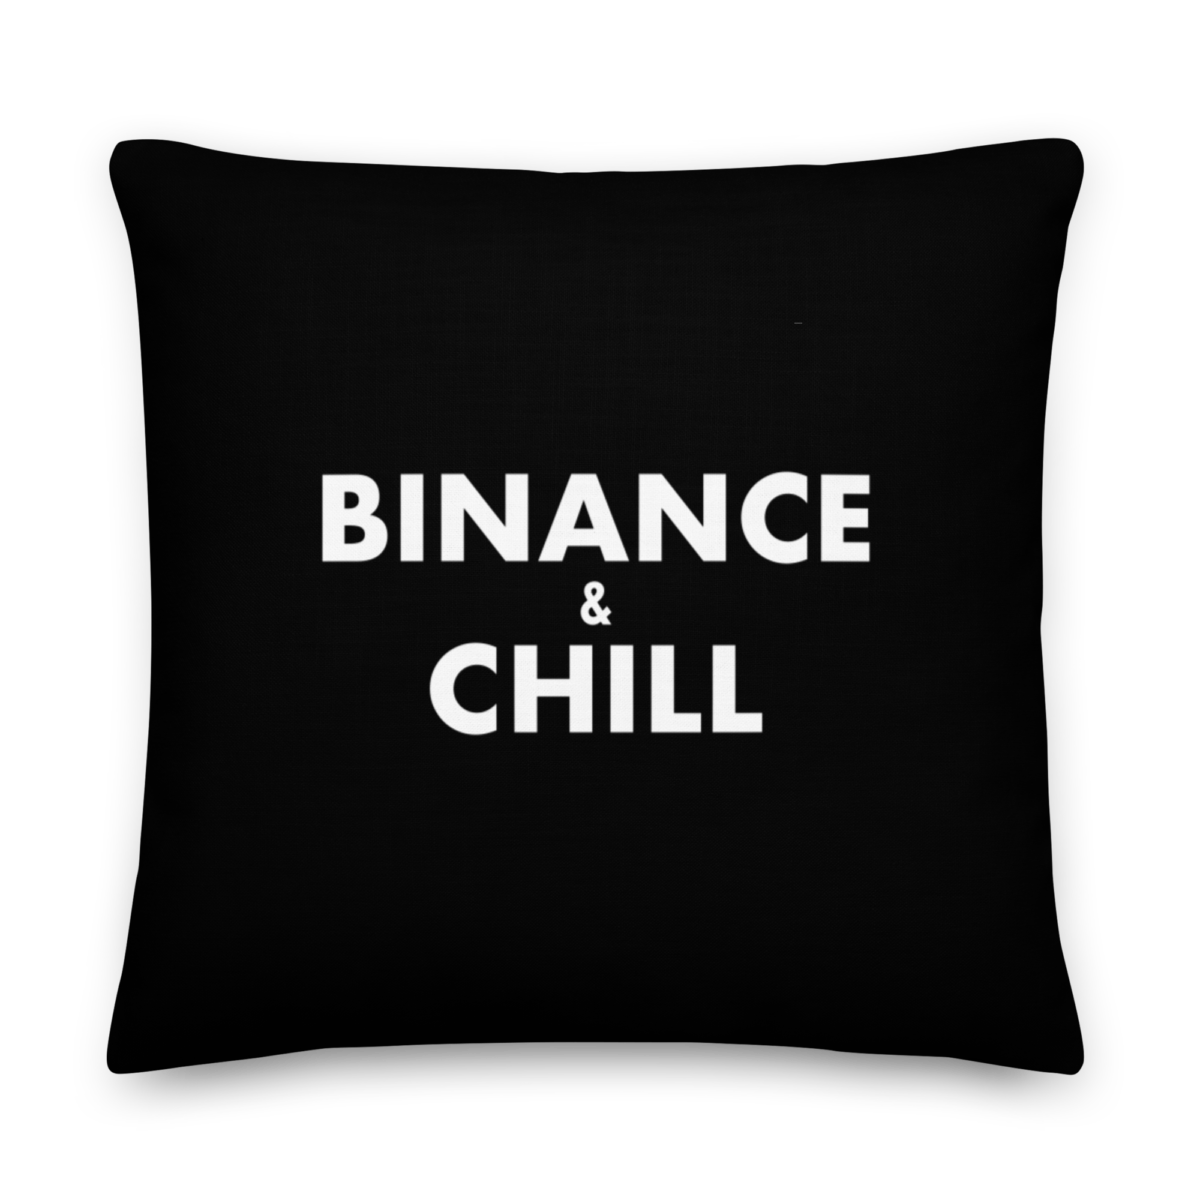 all over print premium pillow 22x22 front 633ee76911f18 - Binance & Chill Premium Pillow